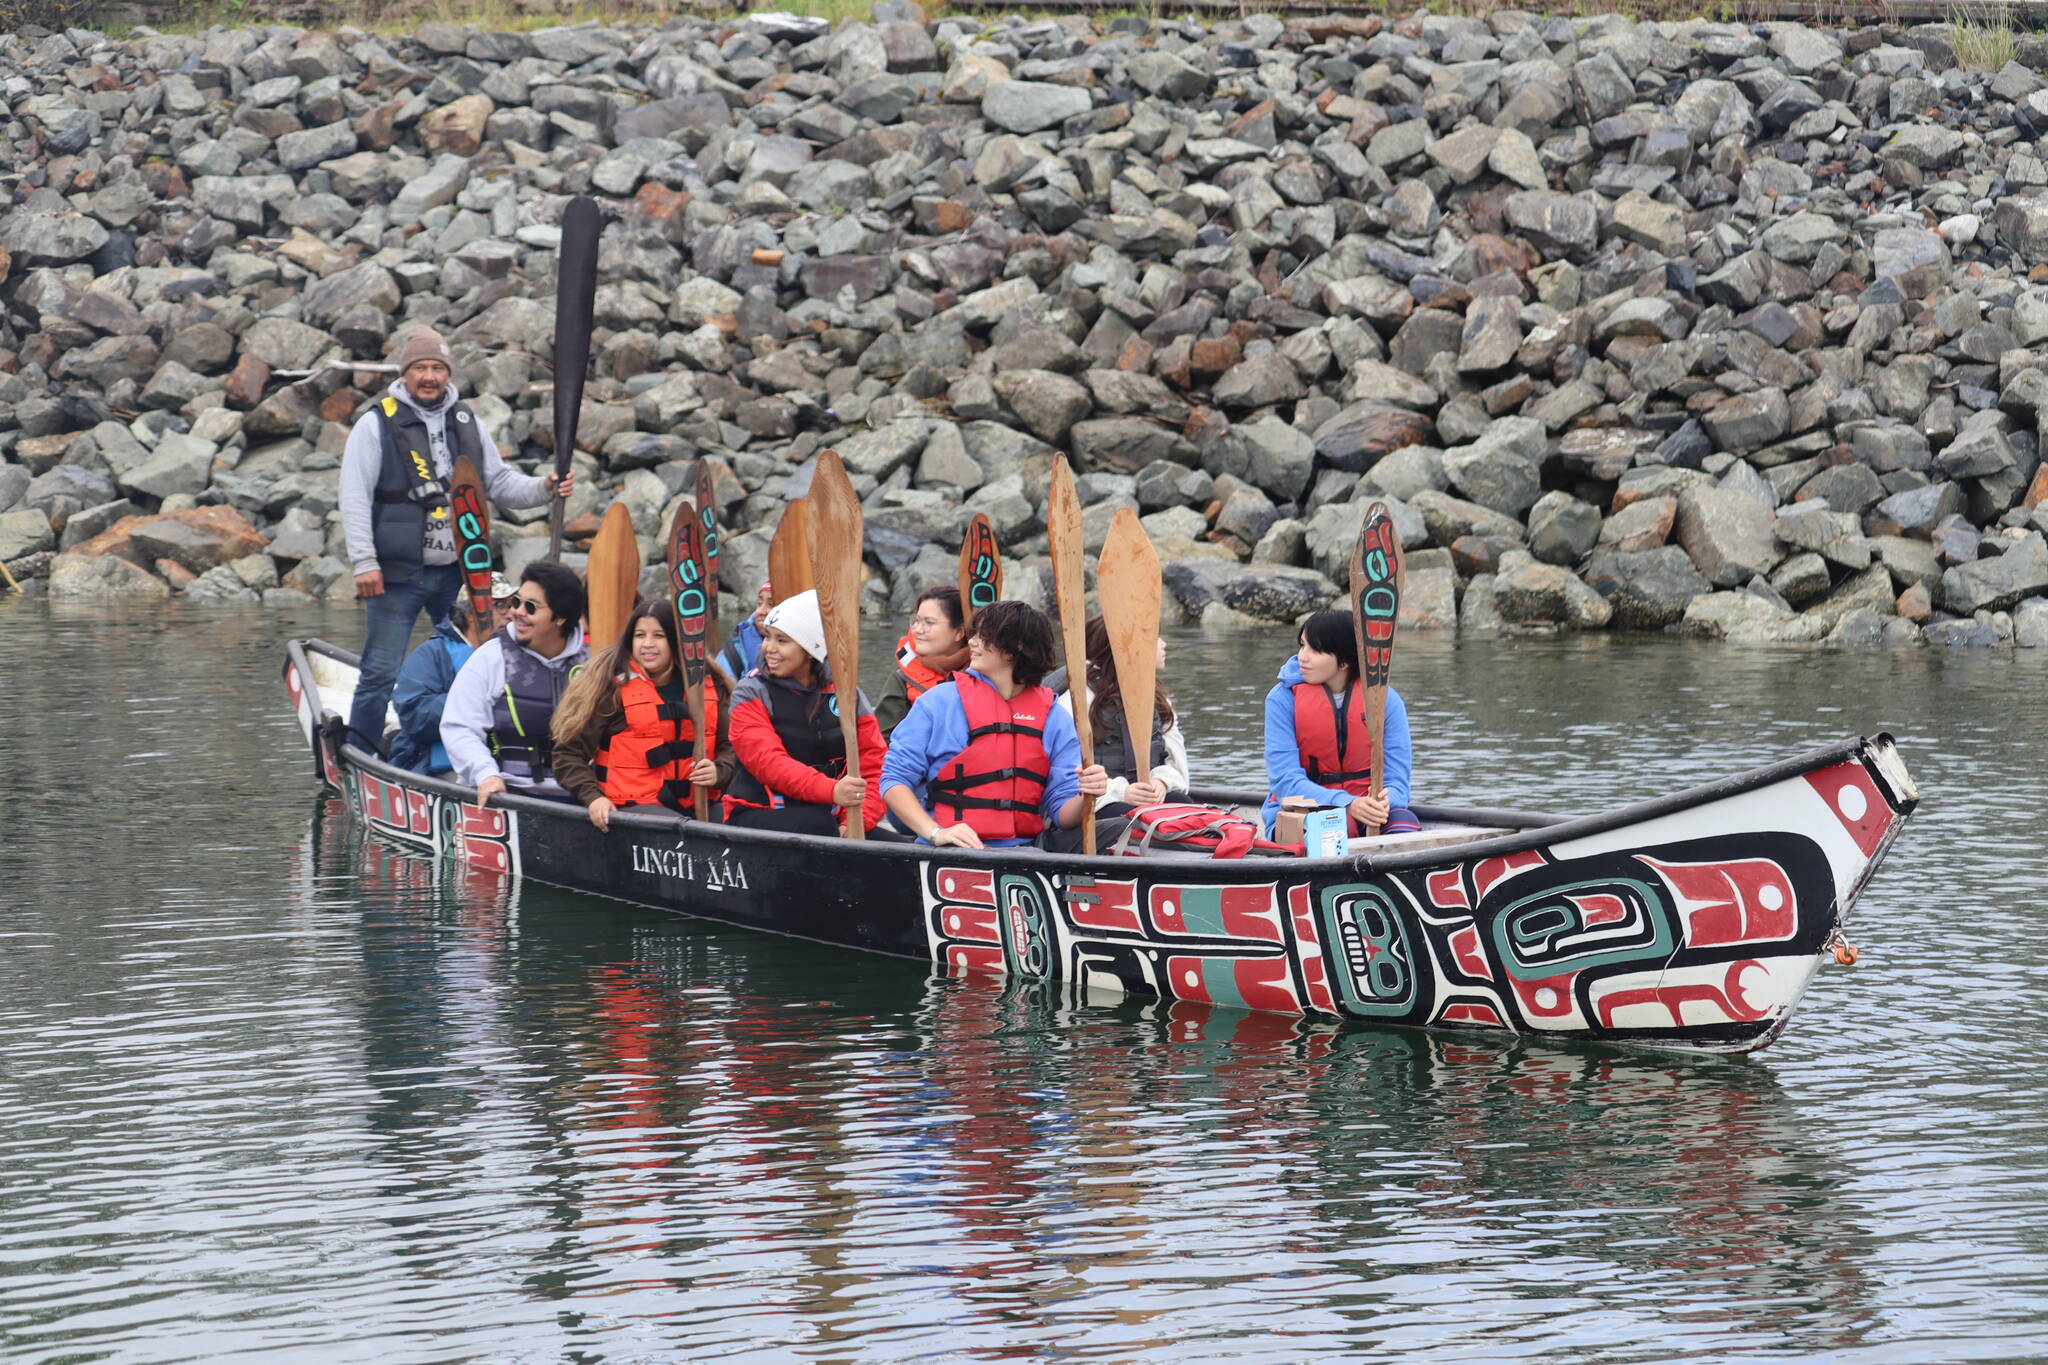 A two-hour Canoe Healing-Journeys was offered for suicide loss and attempt survivors in recognition of International Suicide Prevention Awareness Day, hosted by Juneau Suicide Prevention Coalition and partners on Saturday, Sept.10 at Sandy Beach. (Jonson Kuhn / Juneau Empire)